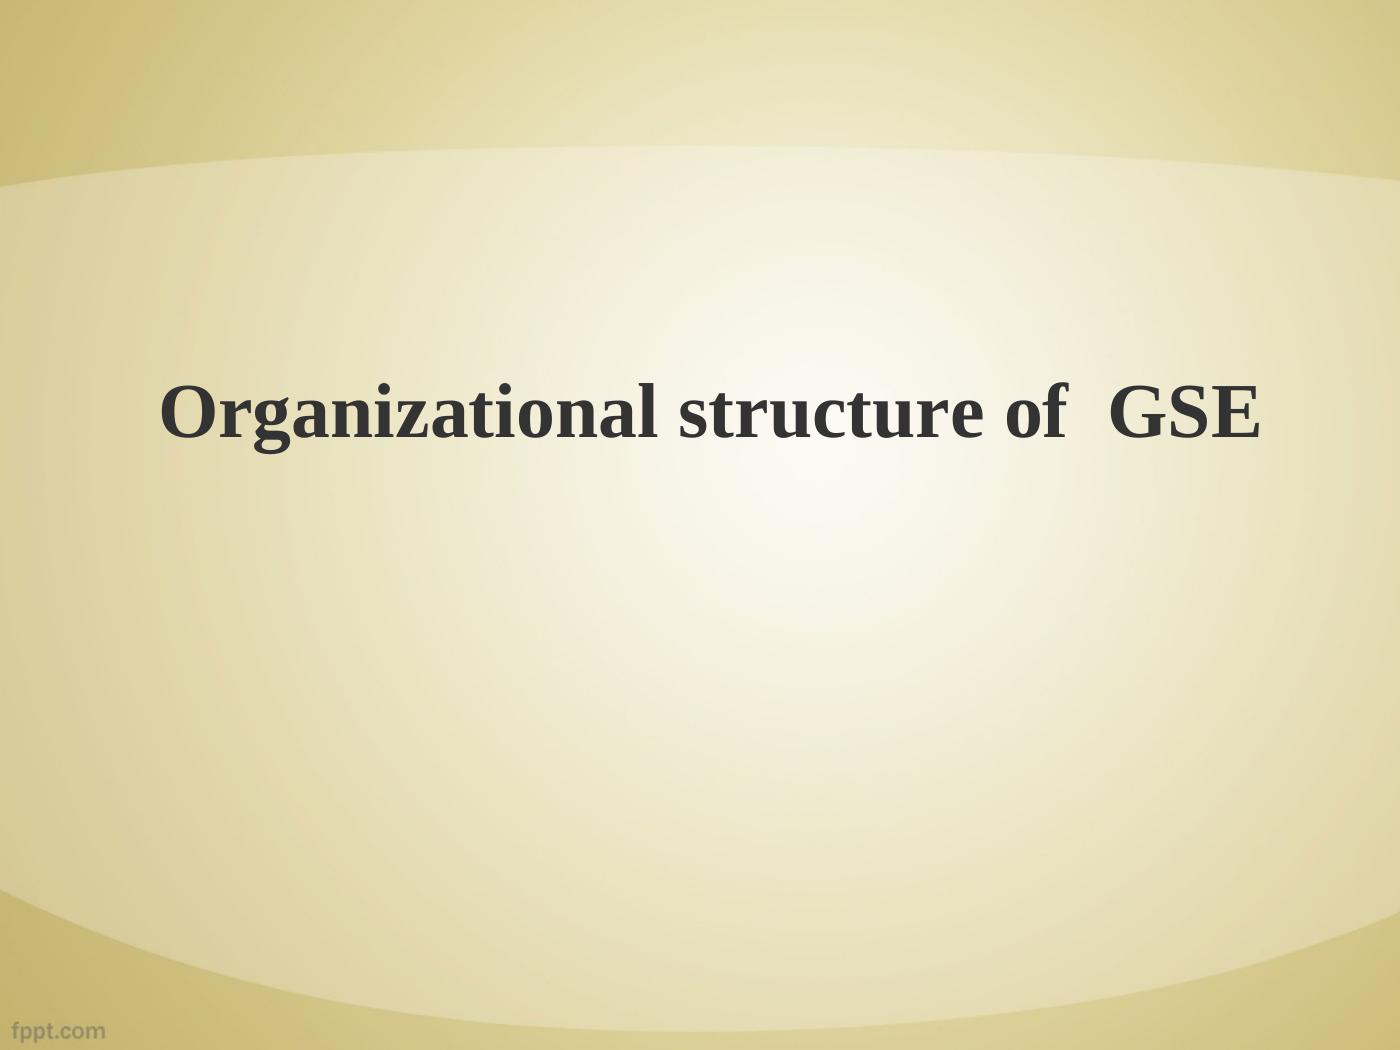 Organizational Structure of GSE_2